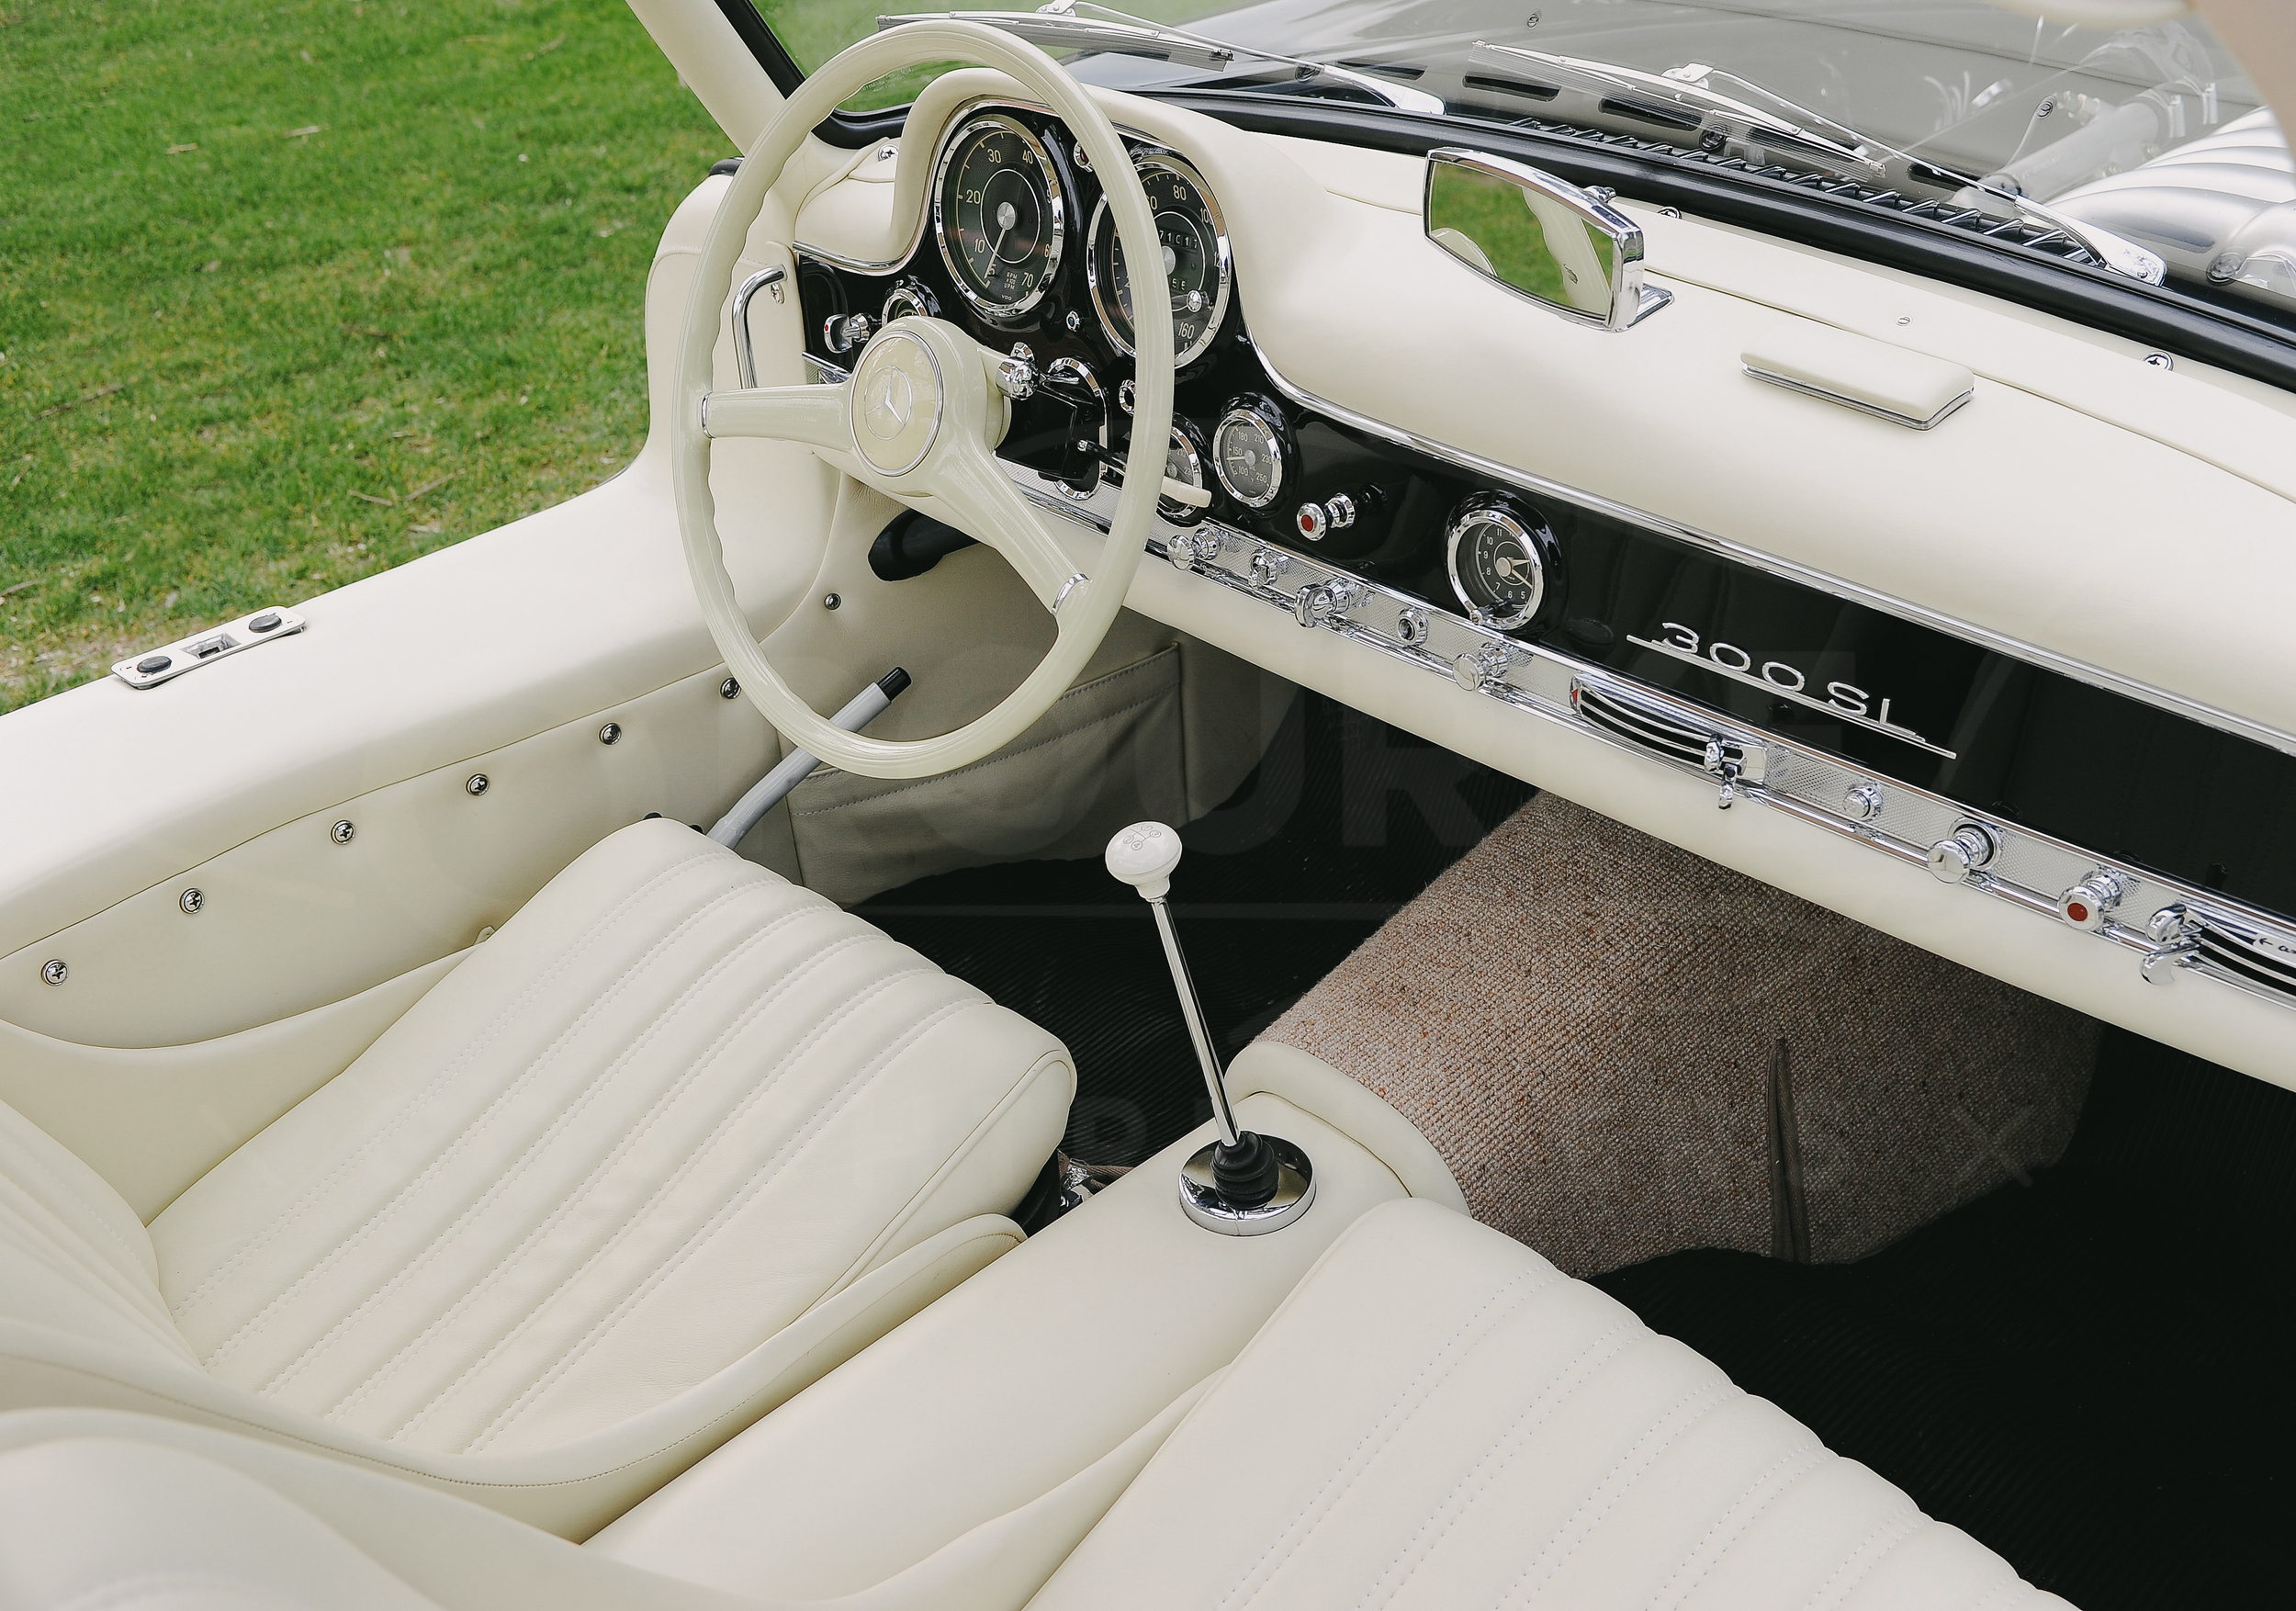 o-rourke-coachtrimmers-mercedes-gullwing-300-sl-3.jpg